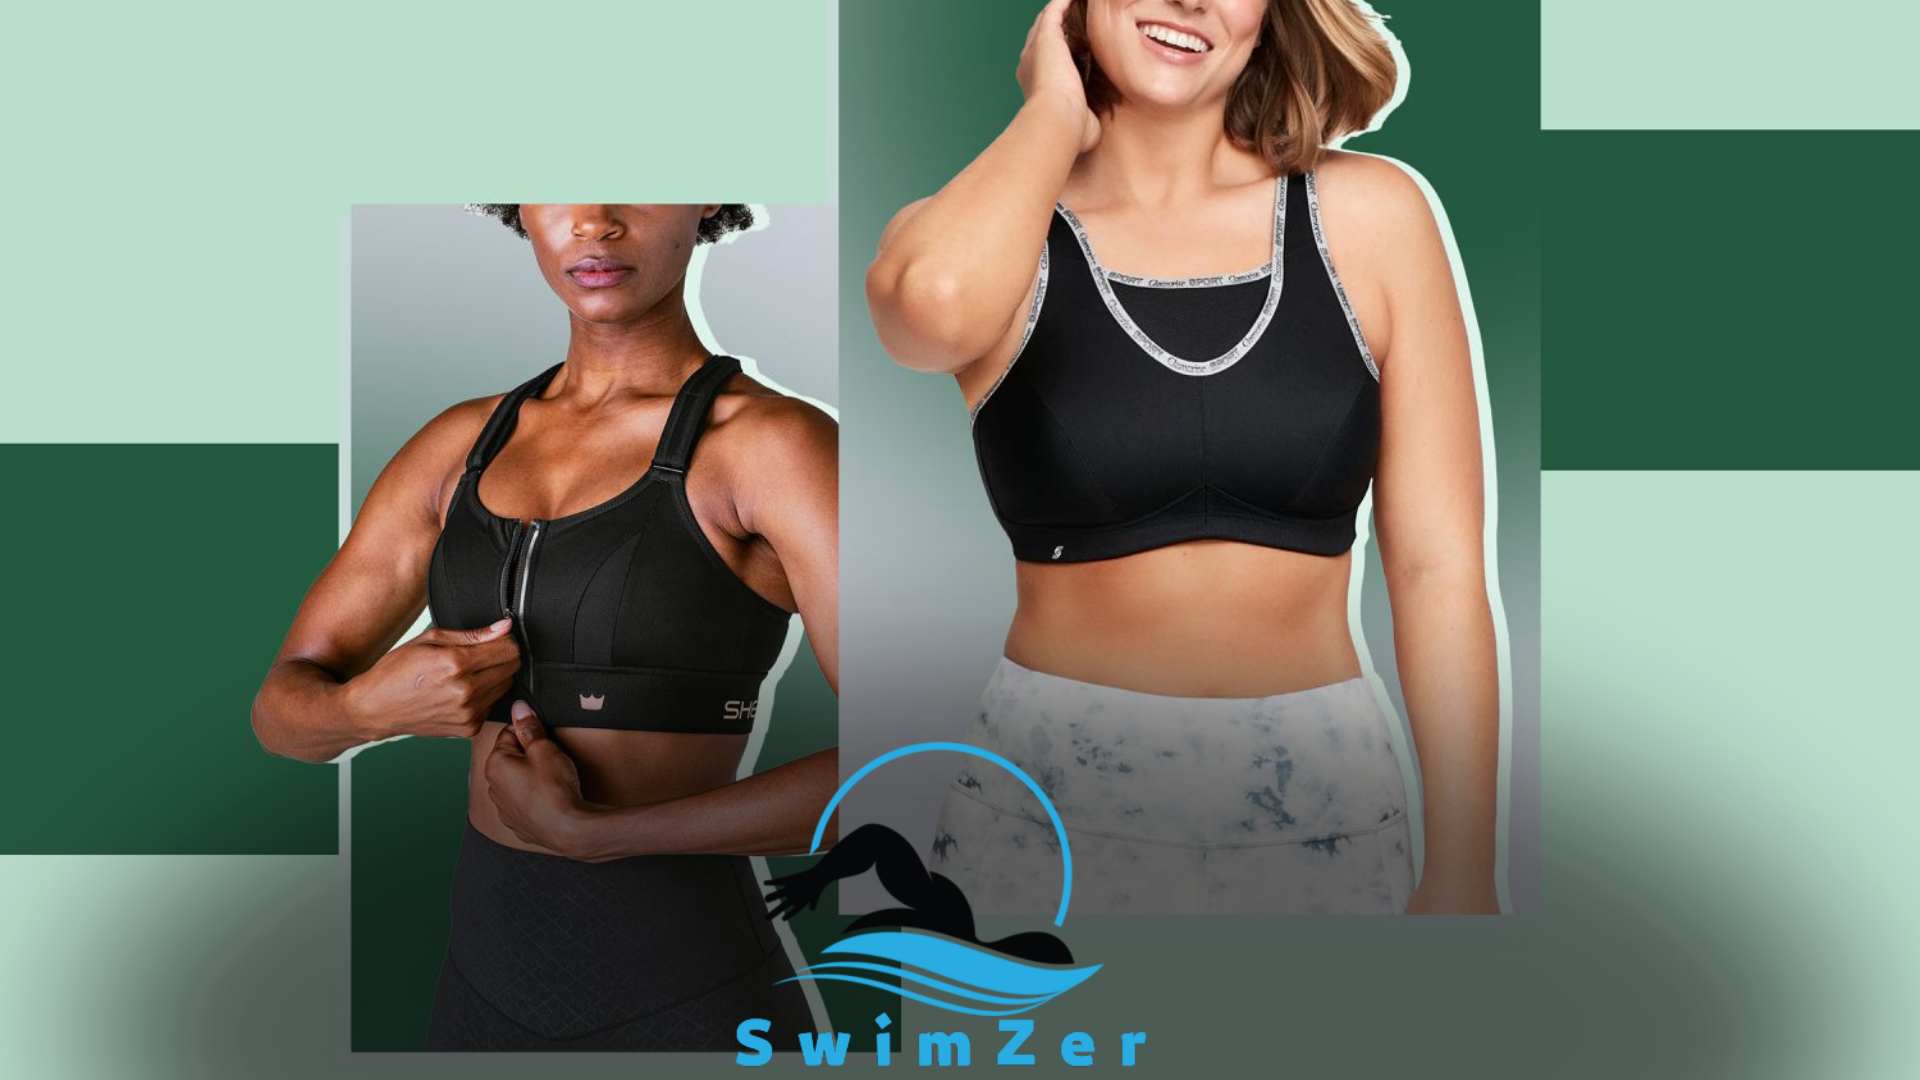 Can You Wear a Sports Bra As a Swimsuit